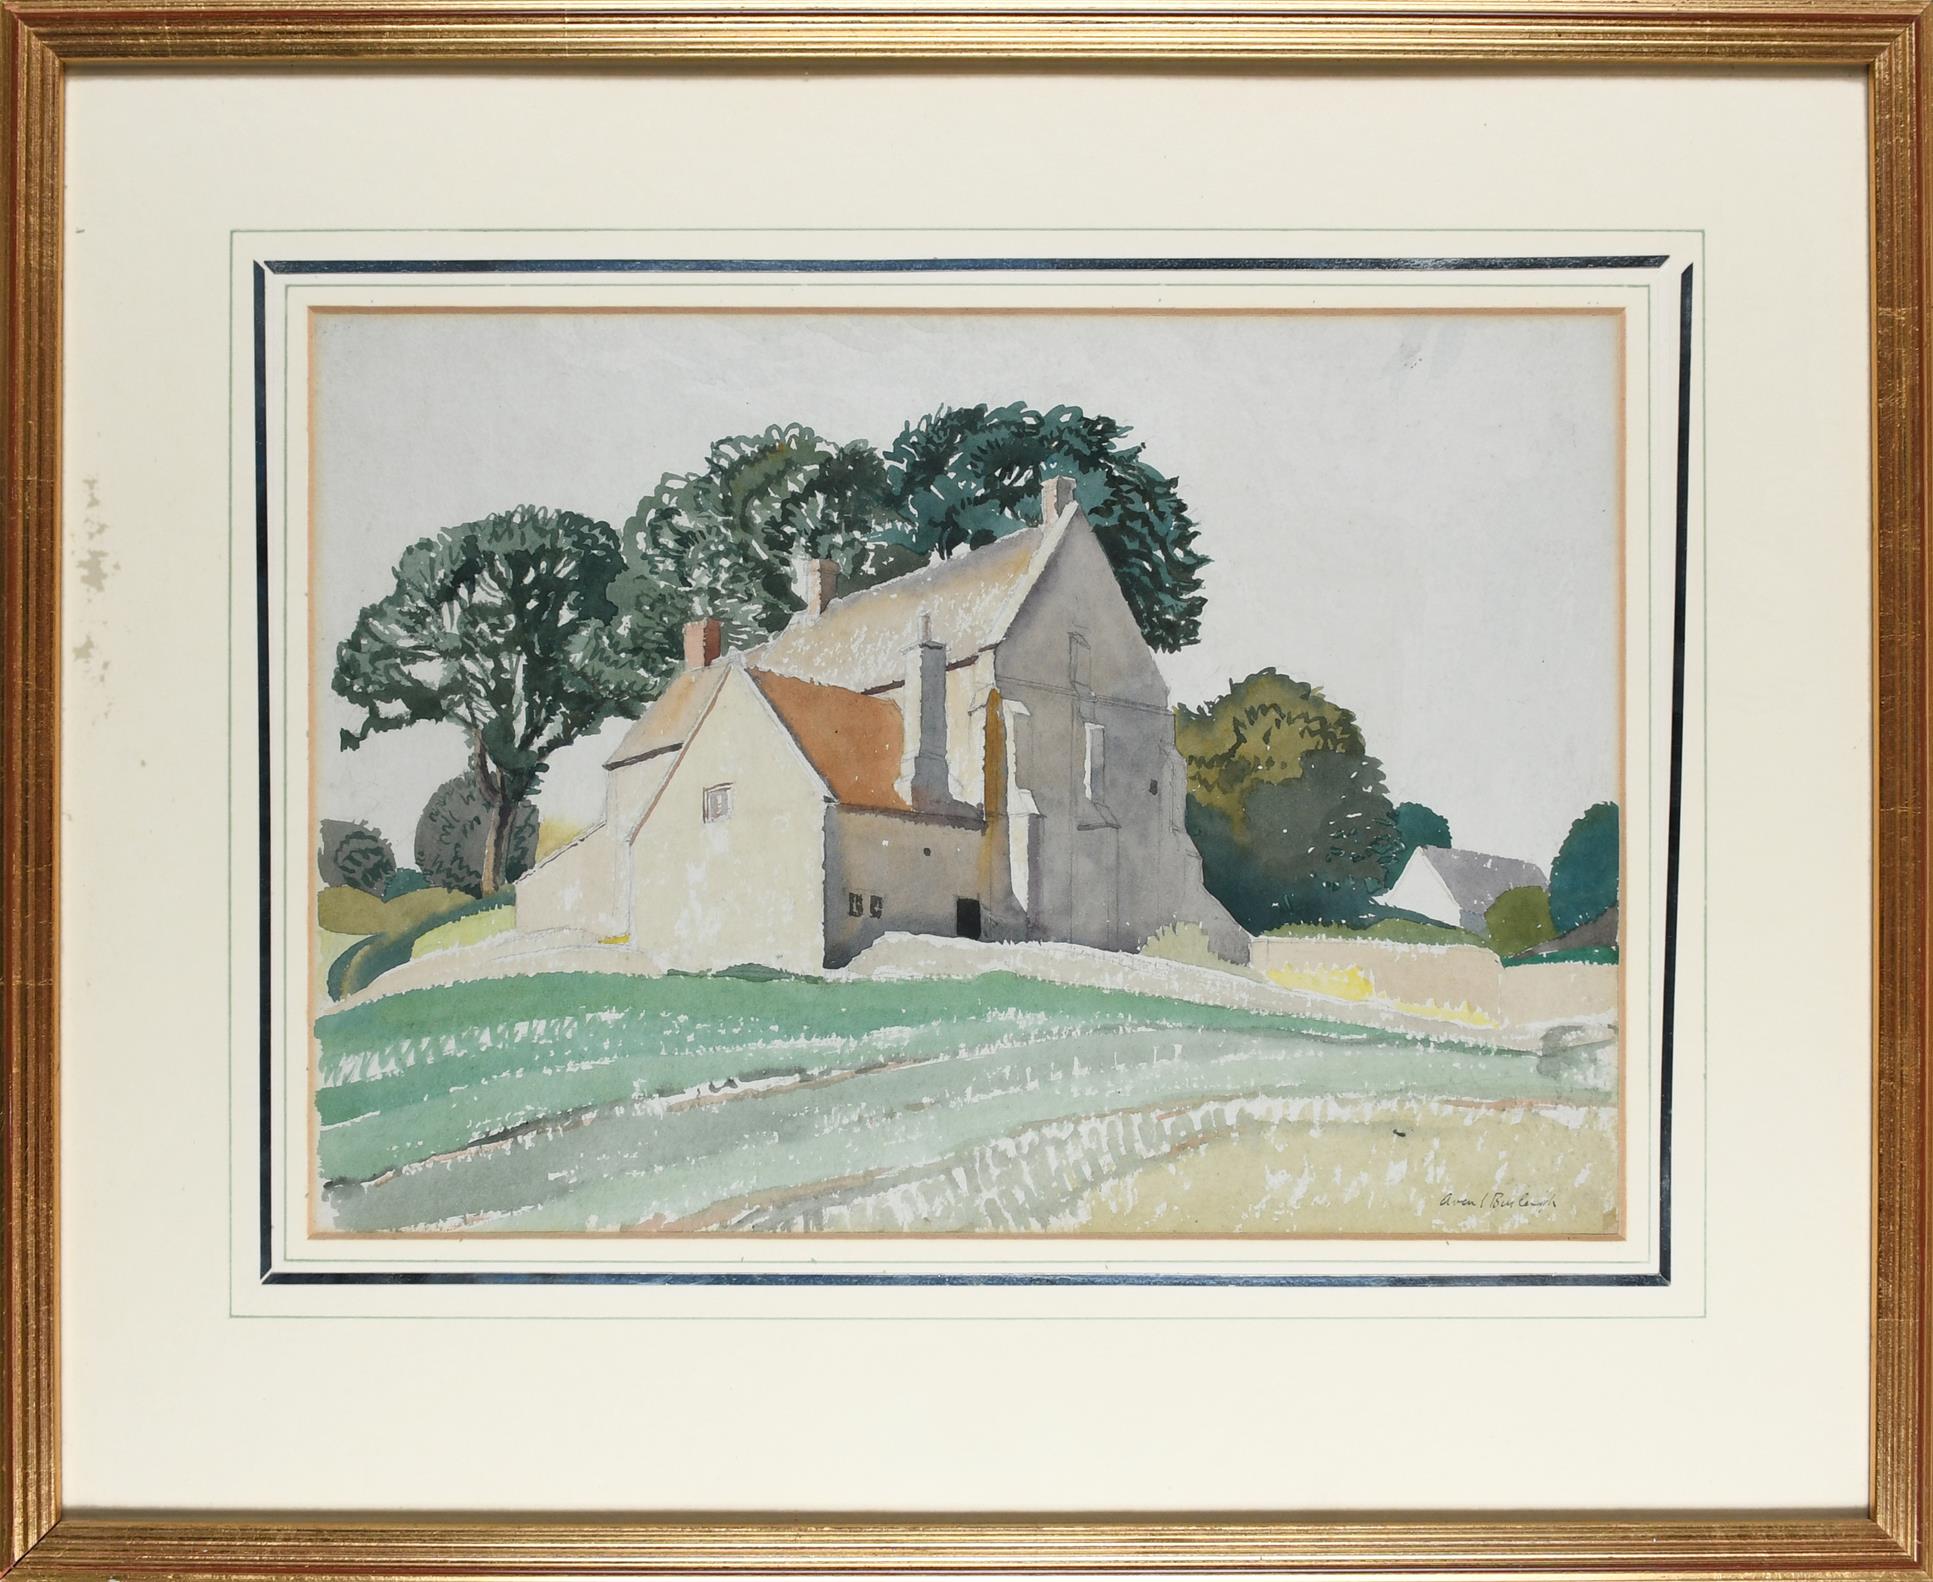 Averil Burleigh (1883-1949) A farmhouse in the Cotswolds Signed Averil Burleigh (lower right) Pencil - Image 2 of 3